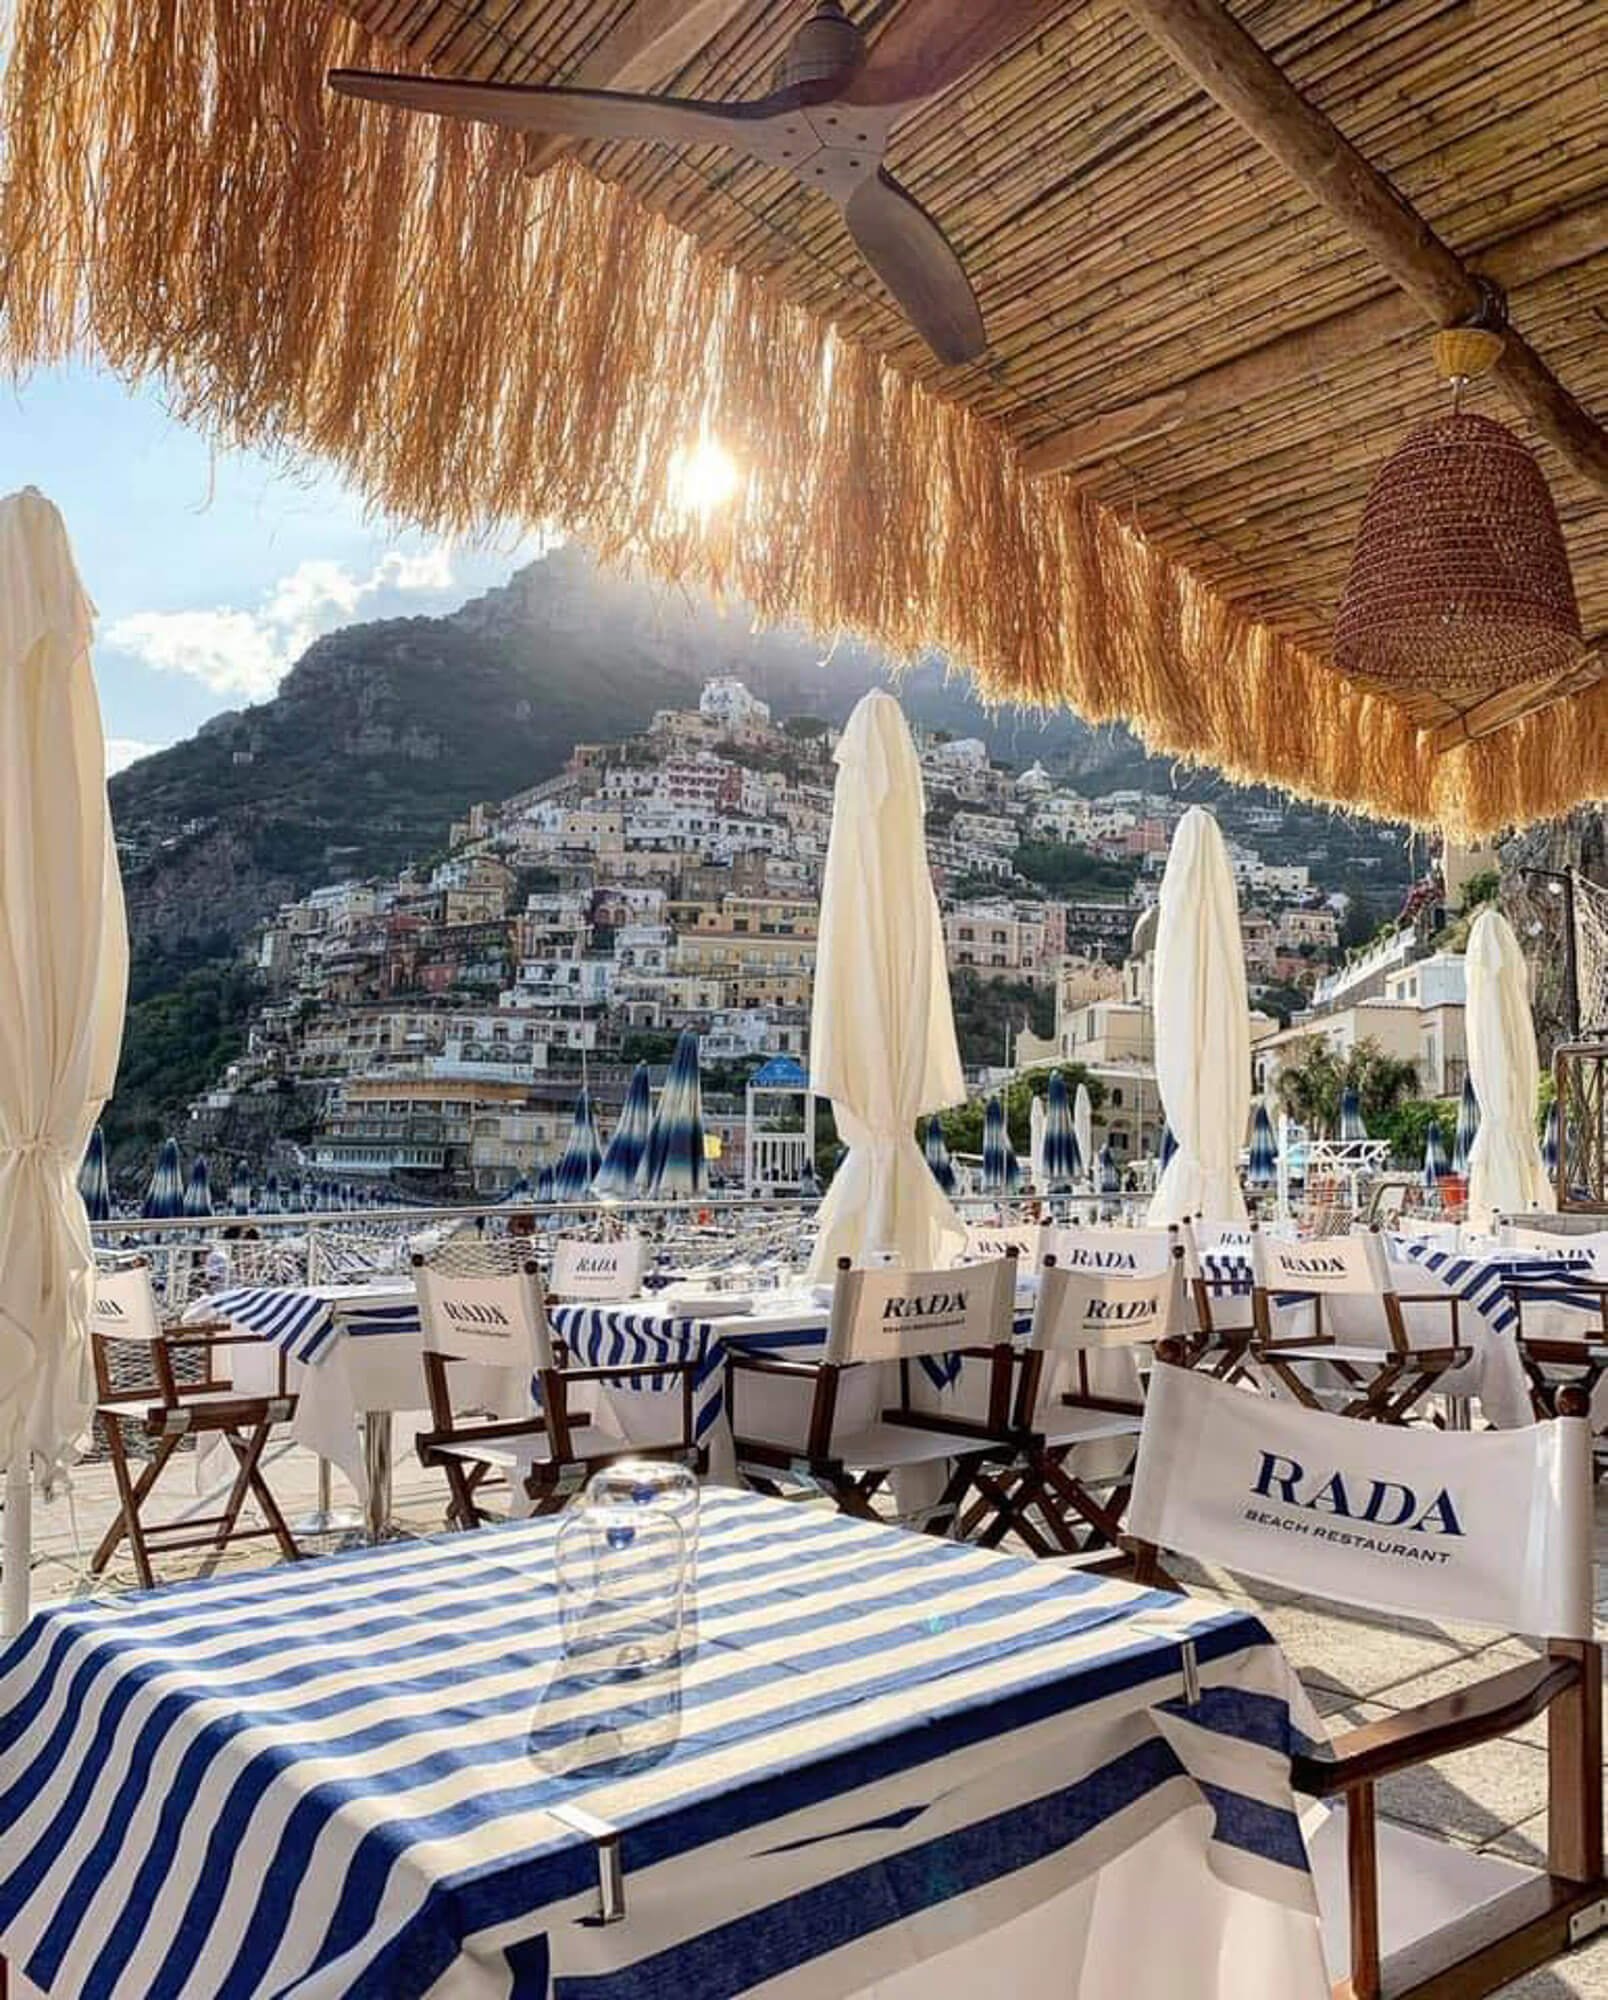 If you're in the mood for an upscale lunch at a Positano restaurant, go to Rada Beach Bistrot.